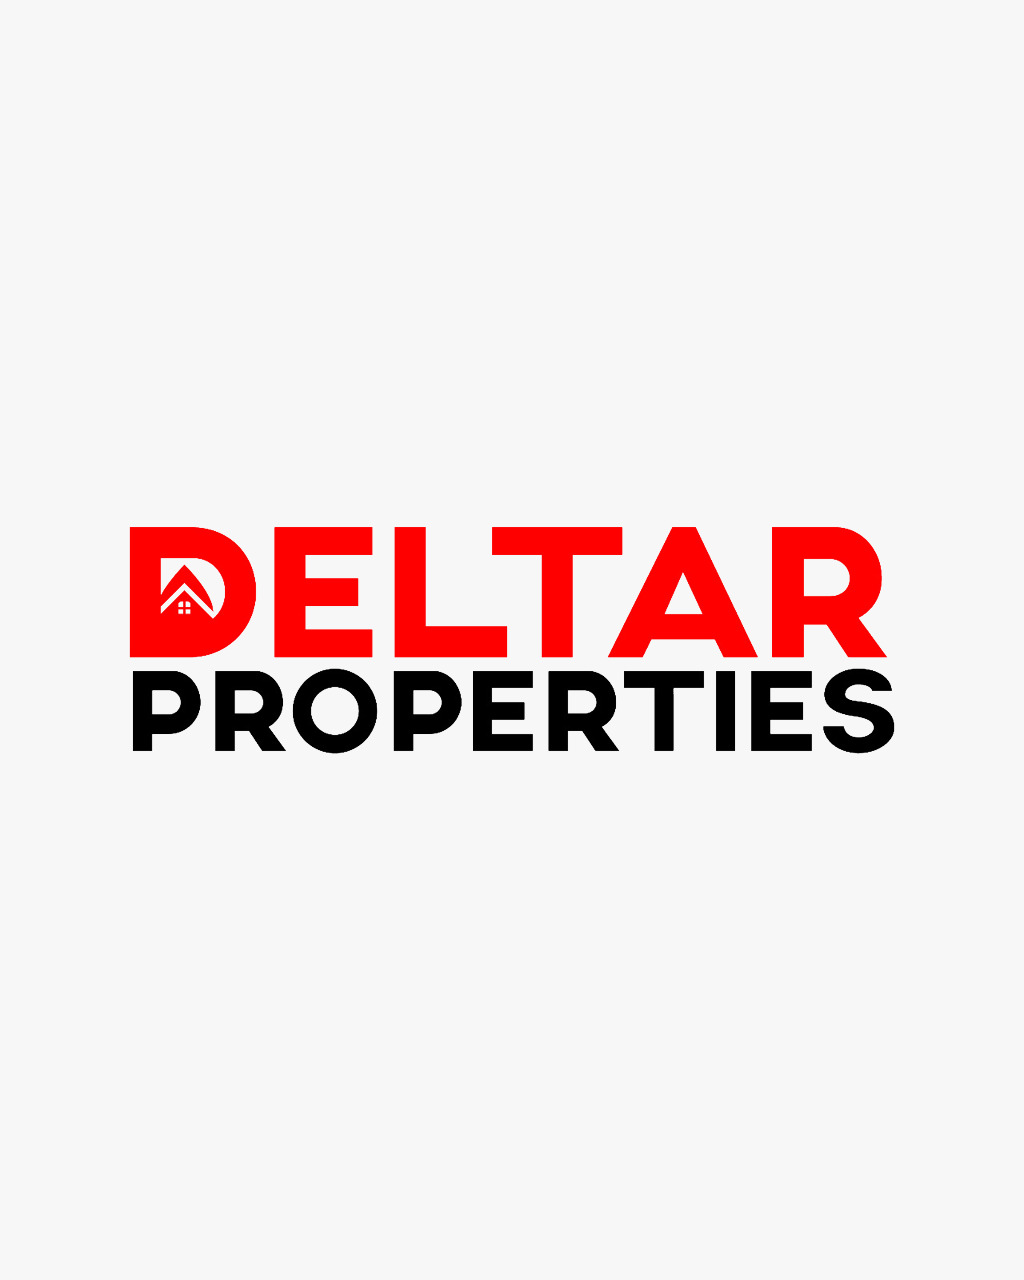 Why Invest in Deltar Properties